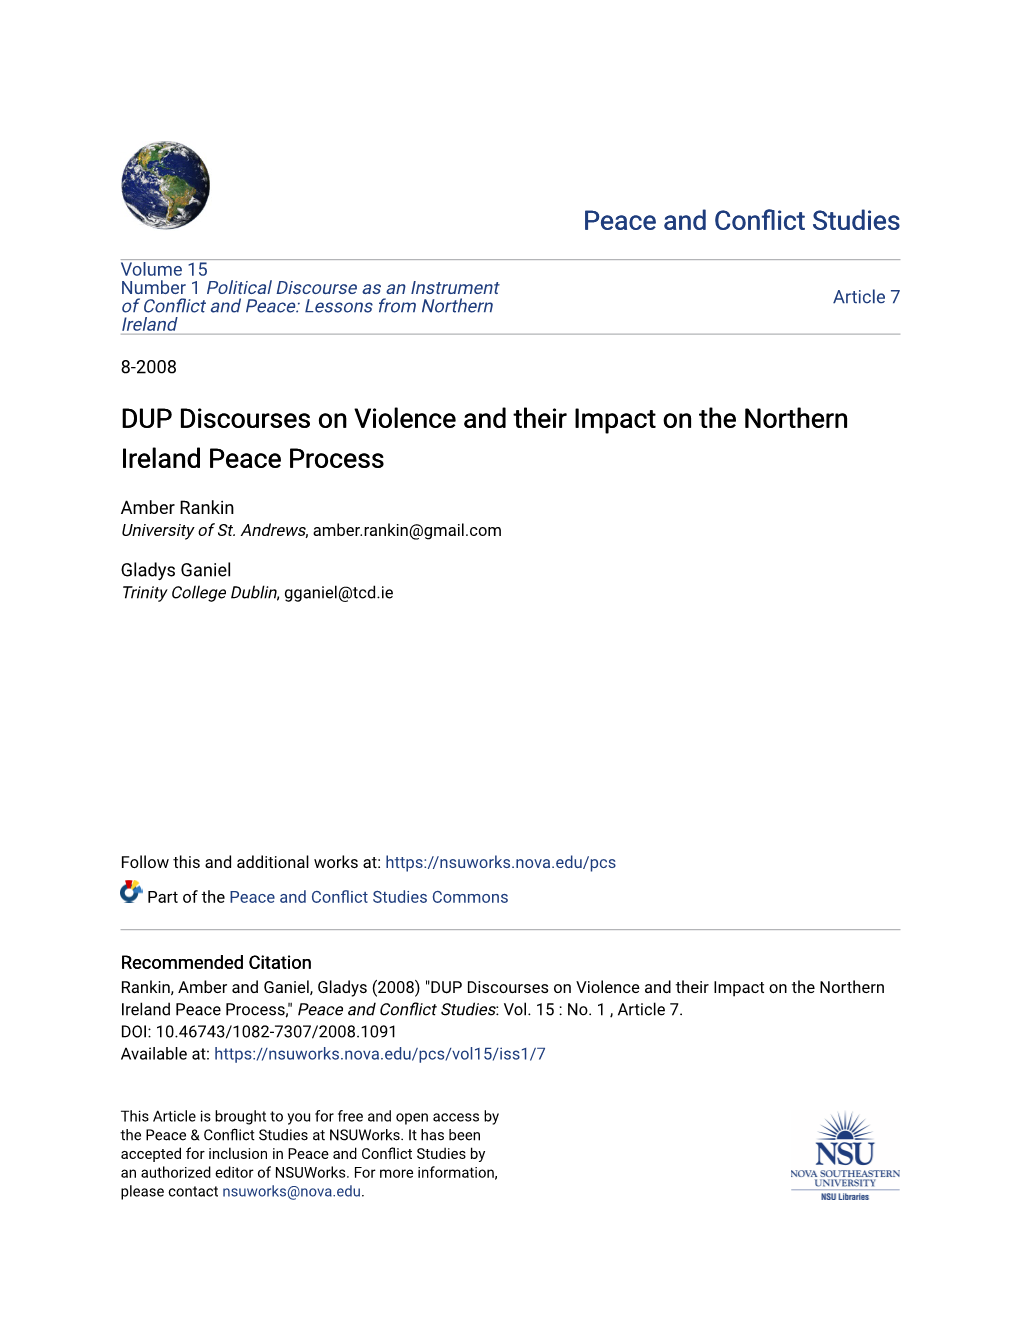 DUP Discourses on Violence and Their Impact on the Northern Ireland Peace Process